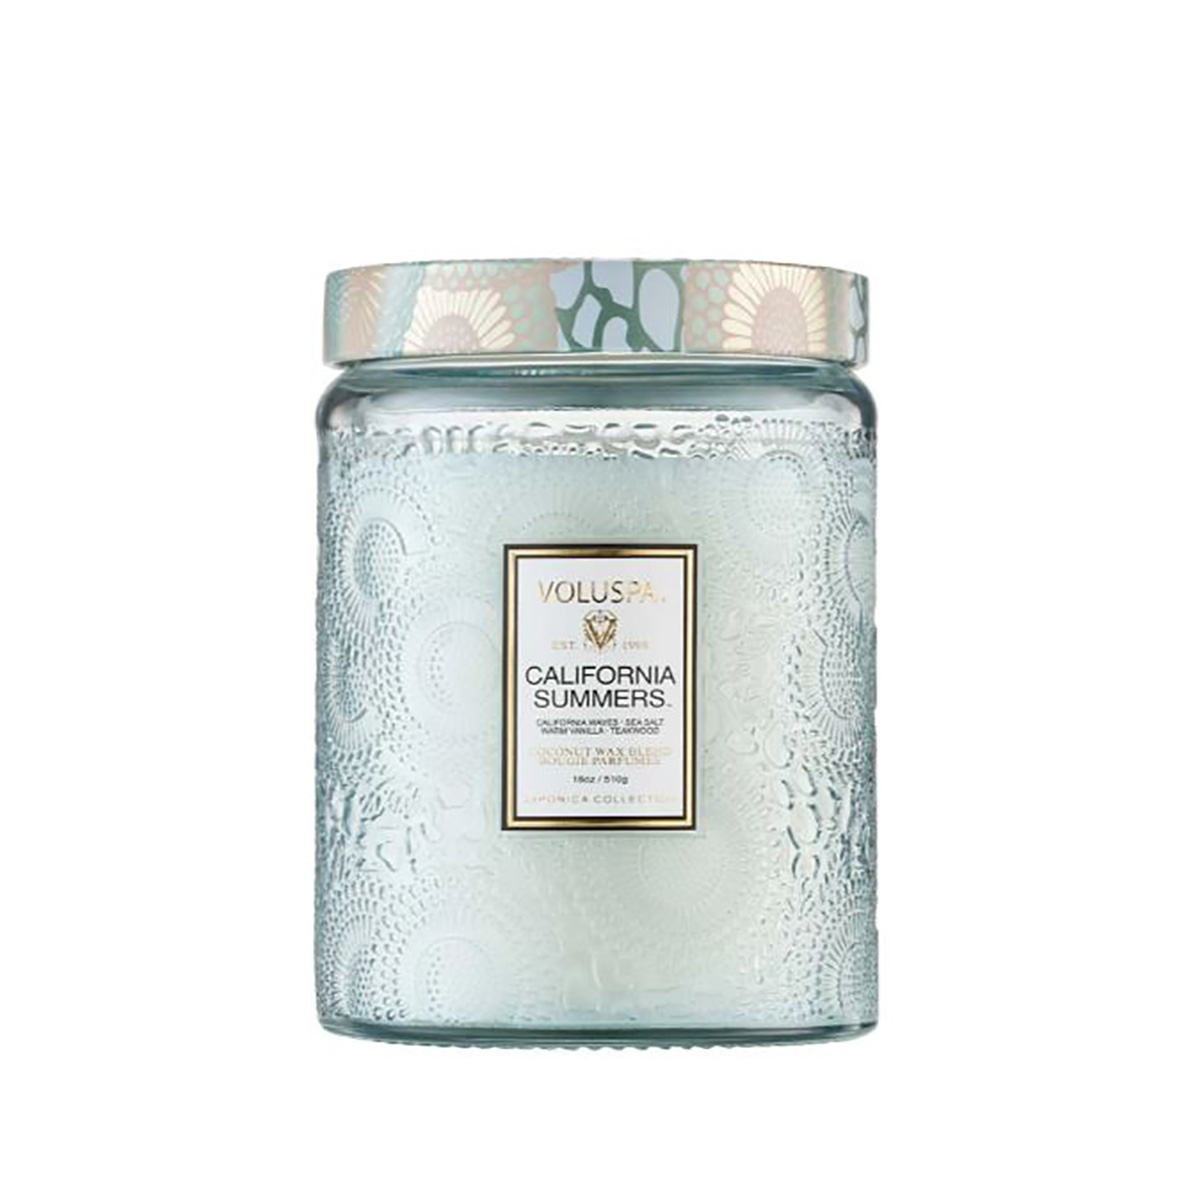 CALIFORNIA SUMMERS LARGE JAR CANDLE 1